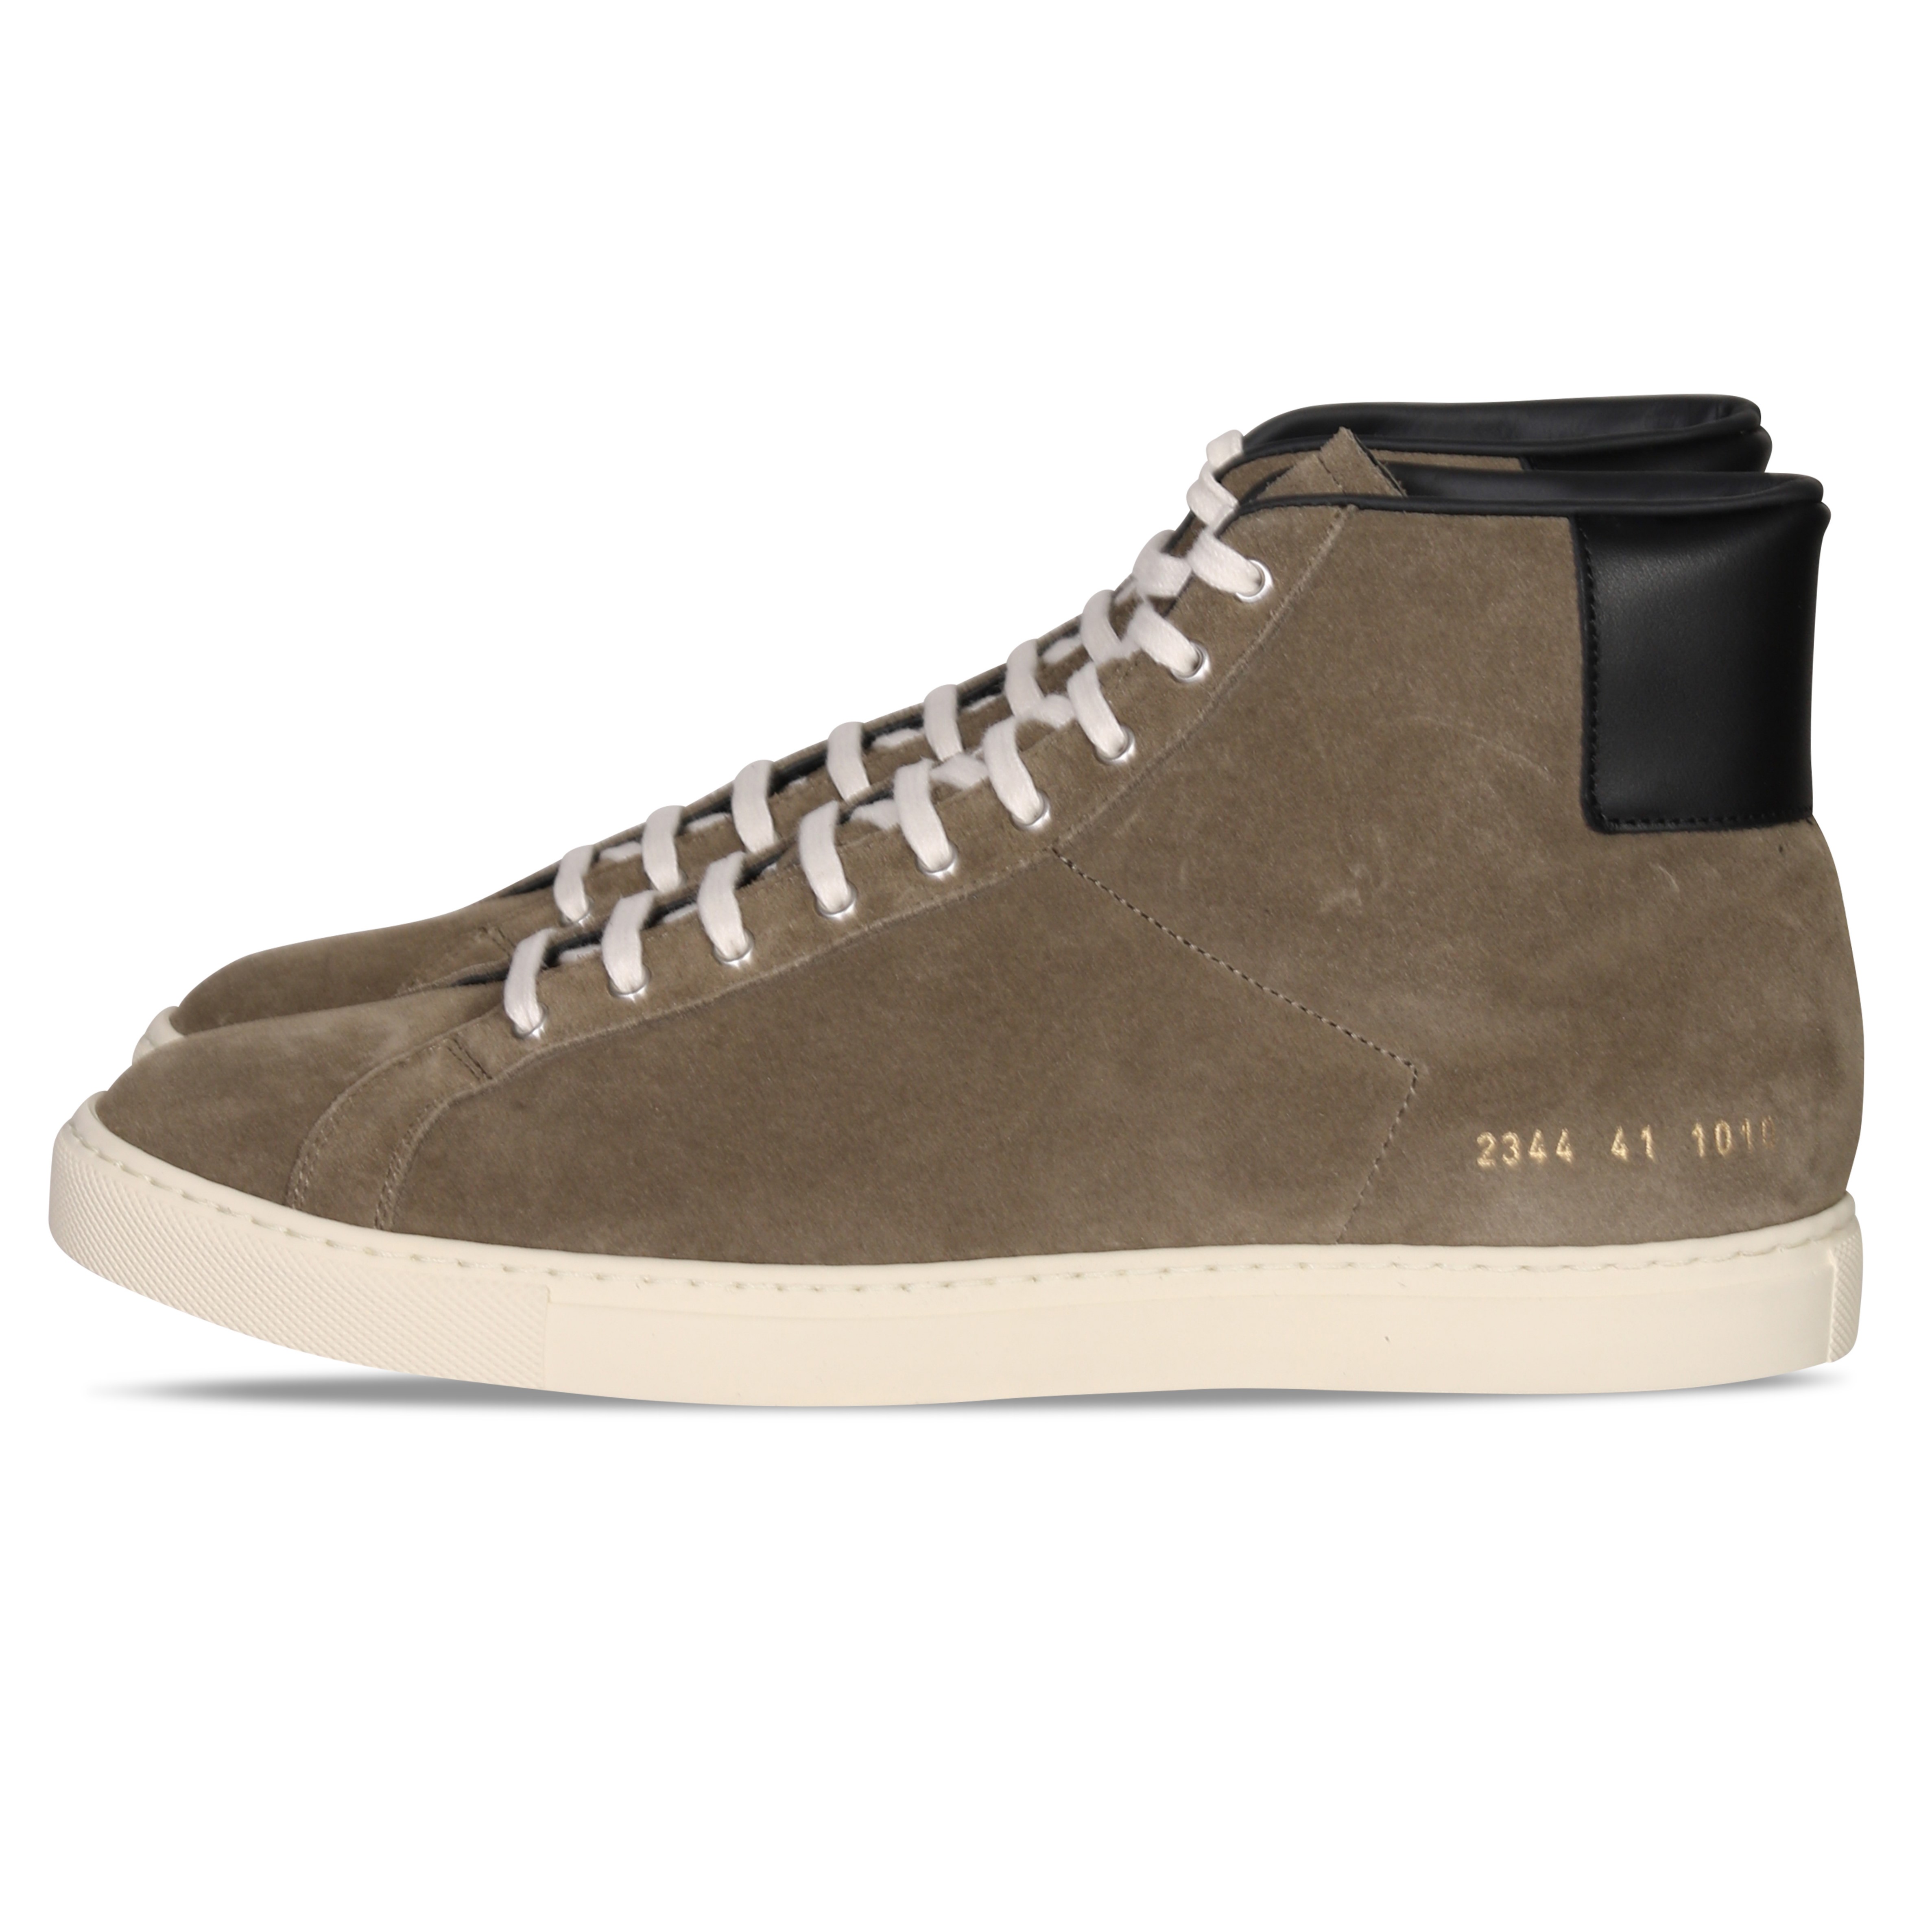 Common Projects Sneaker Retro High in Suede